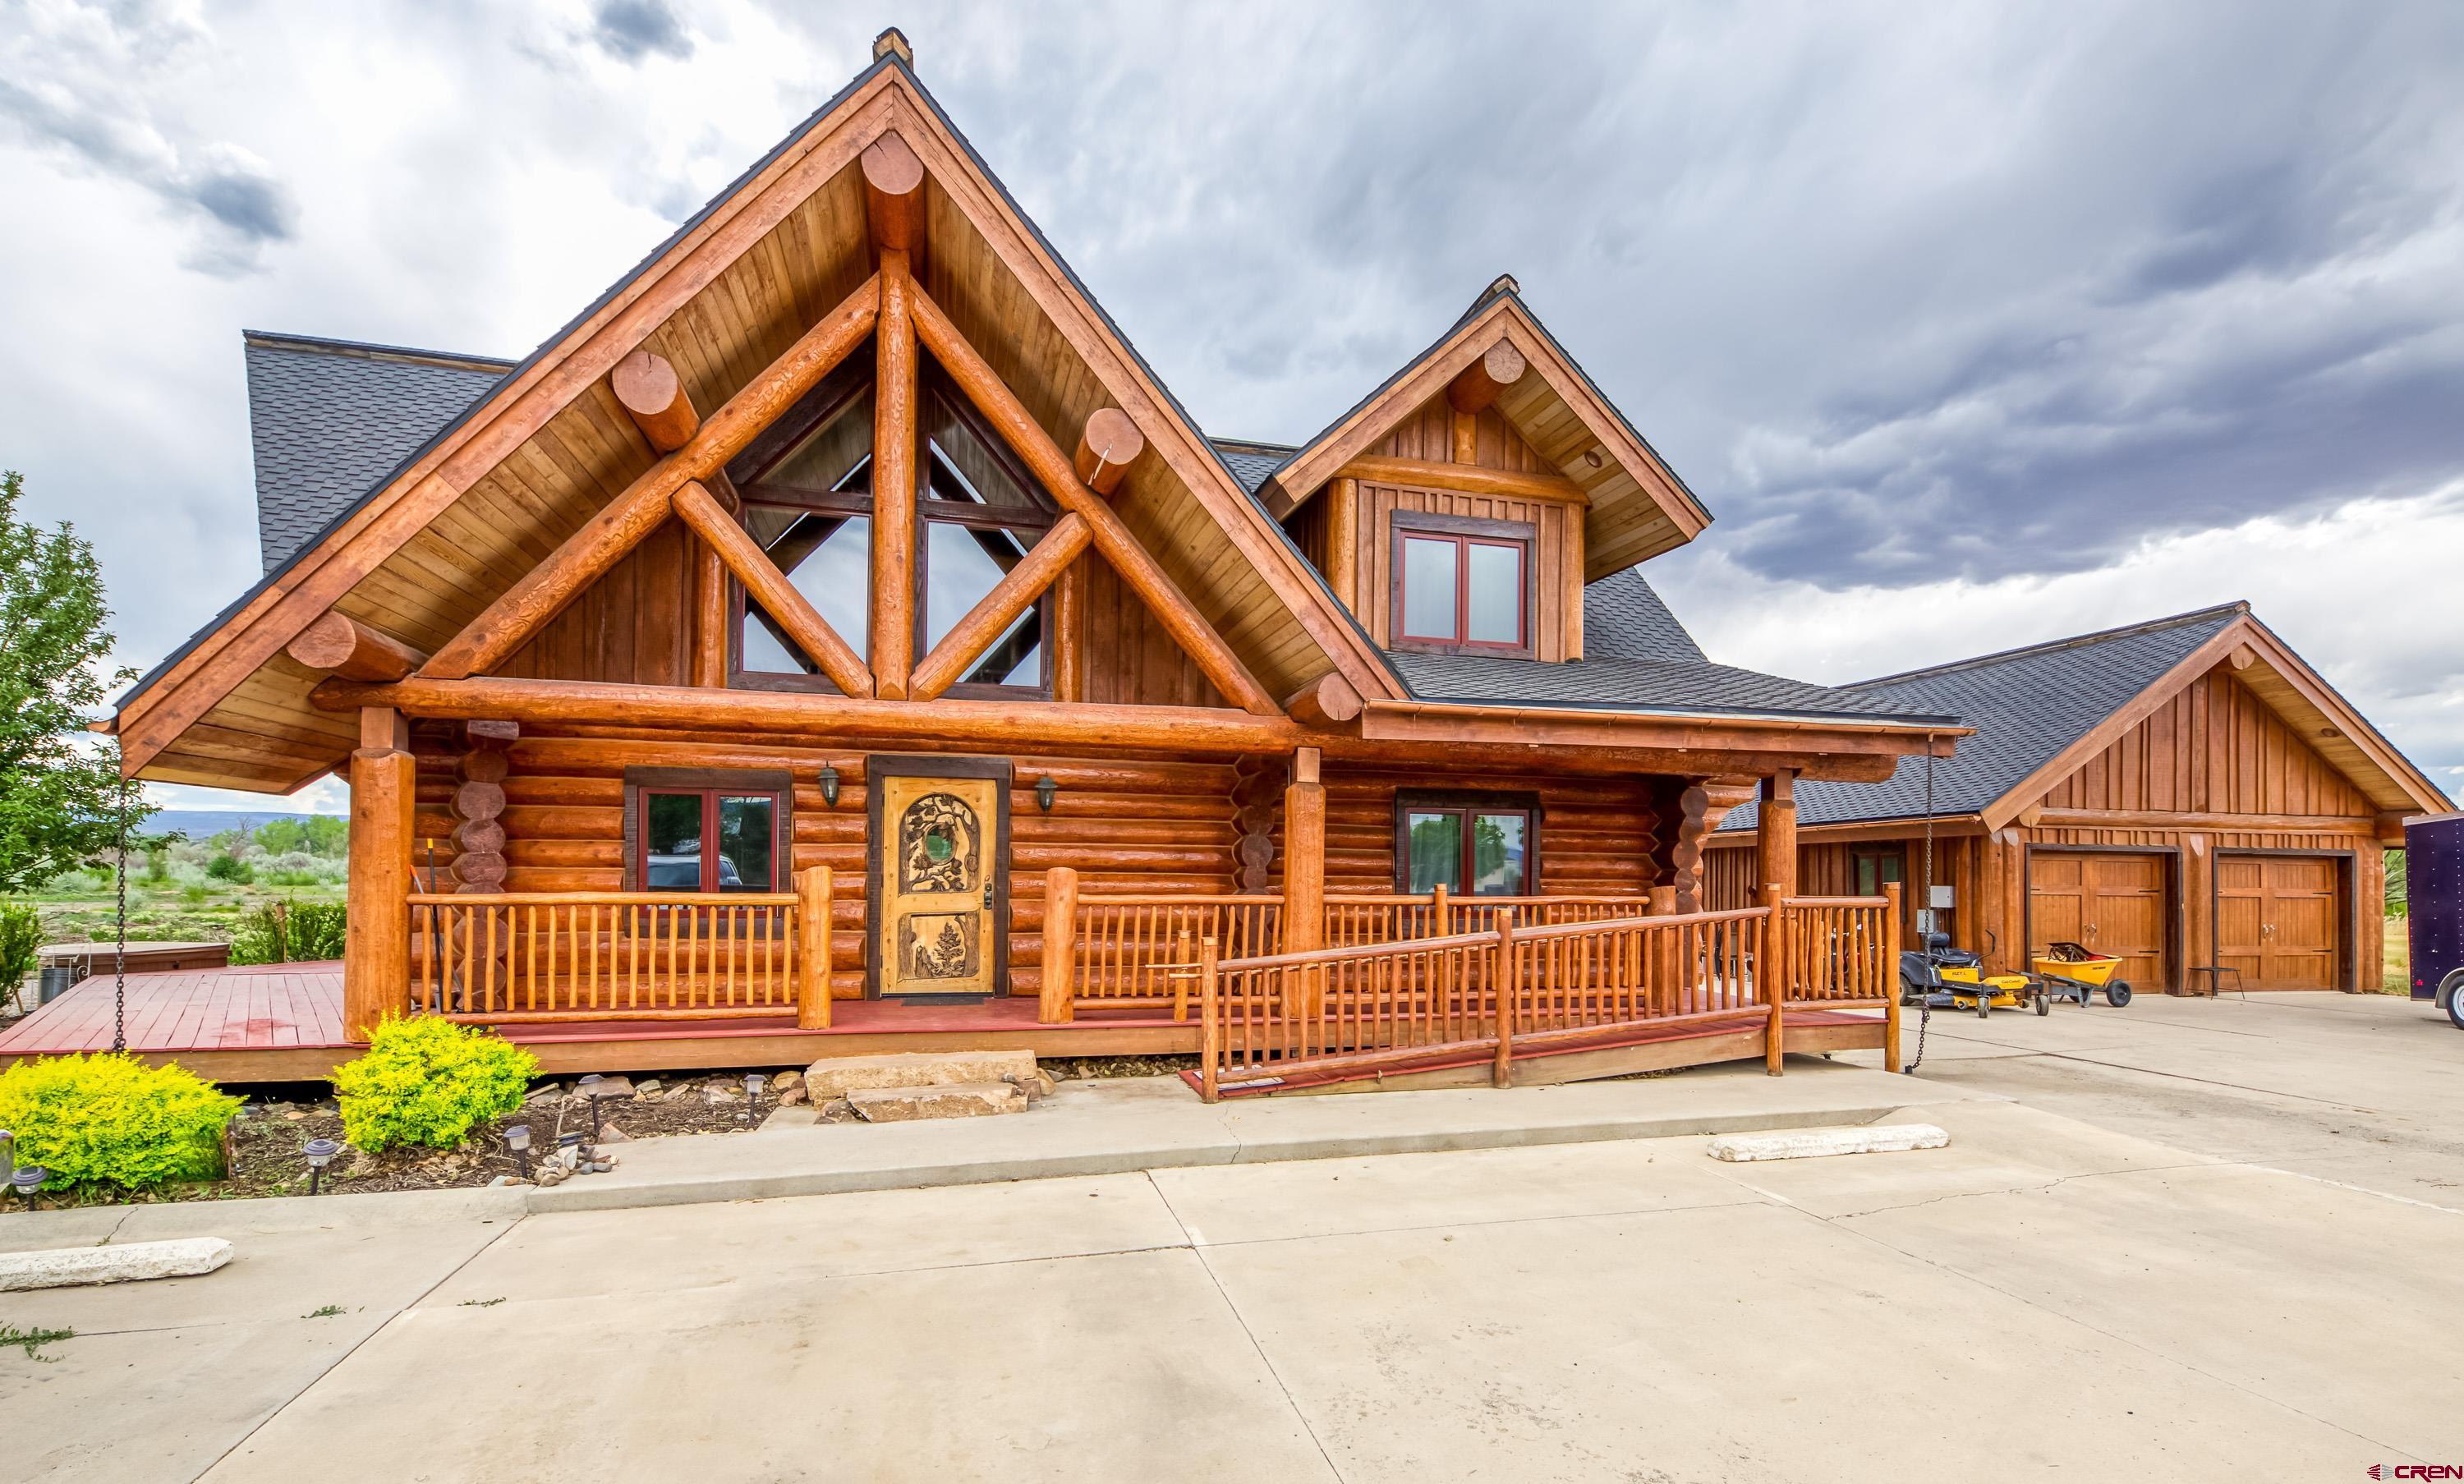 Extremely sought after location for a great business opportunity in Montrose Colorado. Beautiful log home sitting on 1.8 acres  Zoned B2, could be your chance to VRBO, BnB,  or run your business from this fantastic location.  With an ample 3300 sq ft of living area and a Detached 2 car garage with upstairs loft that could be converted into additional living space the options are abundant.  Gorgeous views of the San Juans from the property.  Vaulted ceiling with open loft and upstairs deck.  This home is located within walking distance to the River Walk Trail and Colorado Outdoors.   Large concrete off-street parking; located at the end of the cul de sac.   The logs have been stripped, re-stained and chinked in 2021.  The interior of the home is spectacular with hand carved walnut floors and plush carpeting.  The kitchen has Bosh appliances with an induction stove and gun metal stainless finish.  Custom kitchen cabinets and a rolling island for additional opportunities.  Gas fireplace ,Steam shower, 2 person hot tub, handicapped entrance, quiet private location.   Finished basement that is currently leased on a month to month basis.   The zoning of this property creates an environment with endless opportunities.  The 1.8 acres leaves room to expand commercially or personally.    Come take a look at this property and seize your entrepreneur dreams.